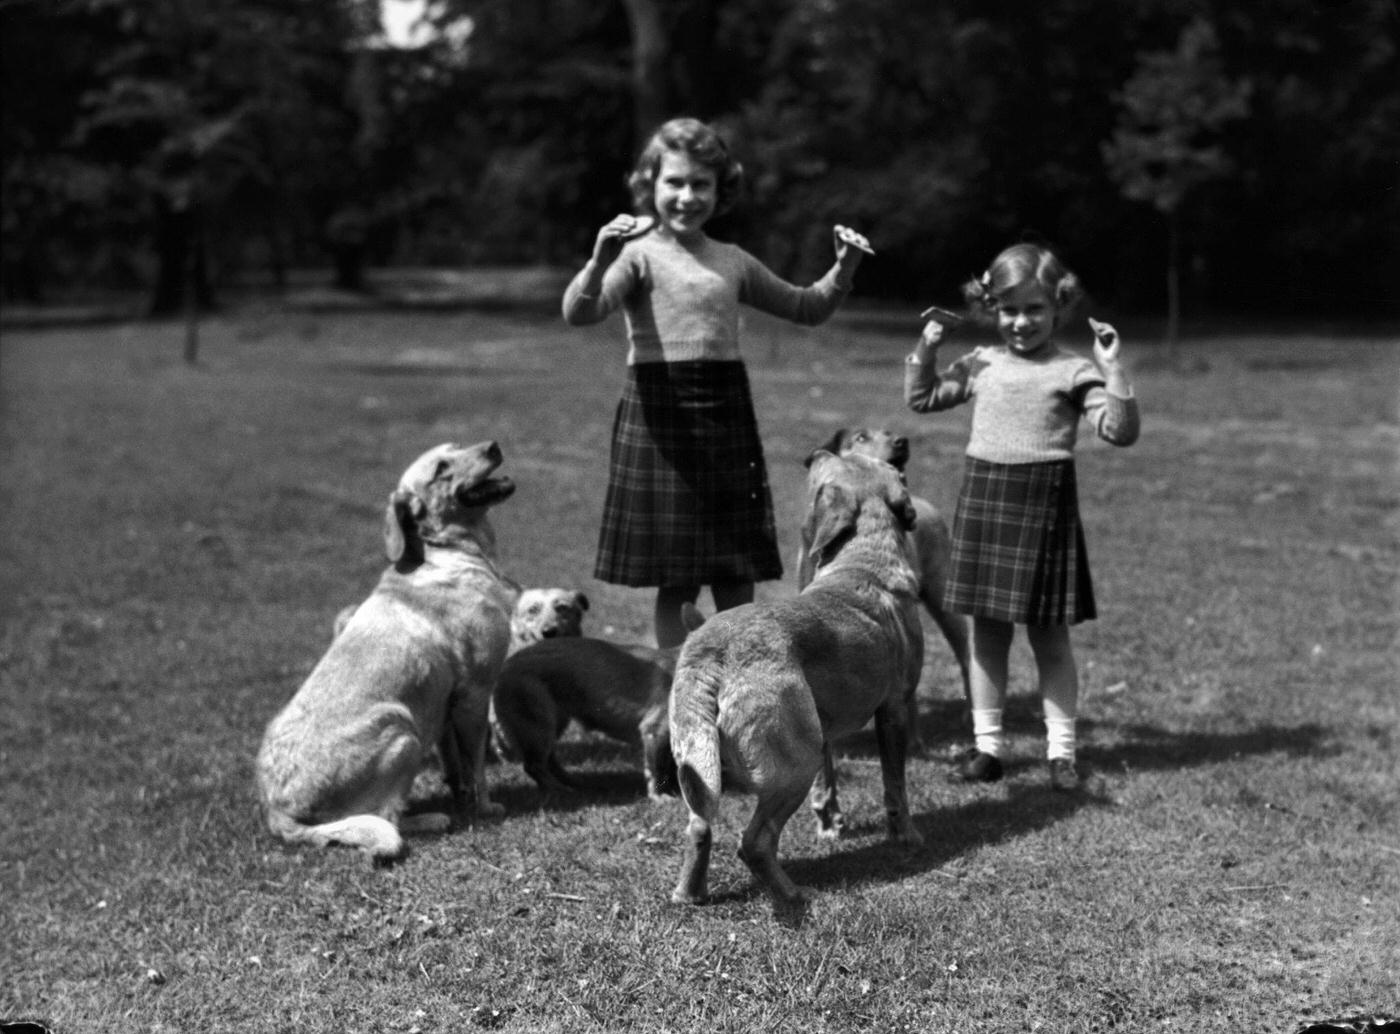 Princess Elizabeth and her sister Princess Margaret wearing kilts and feeding biscuits to dogs at the Royal Lodge, Windsor, UK.